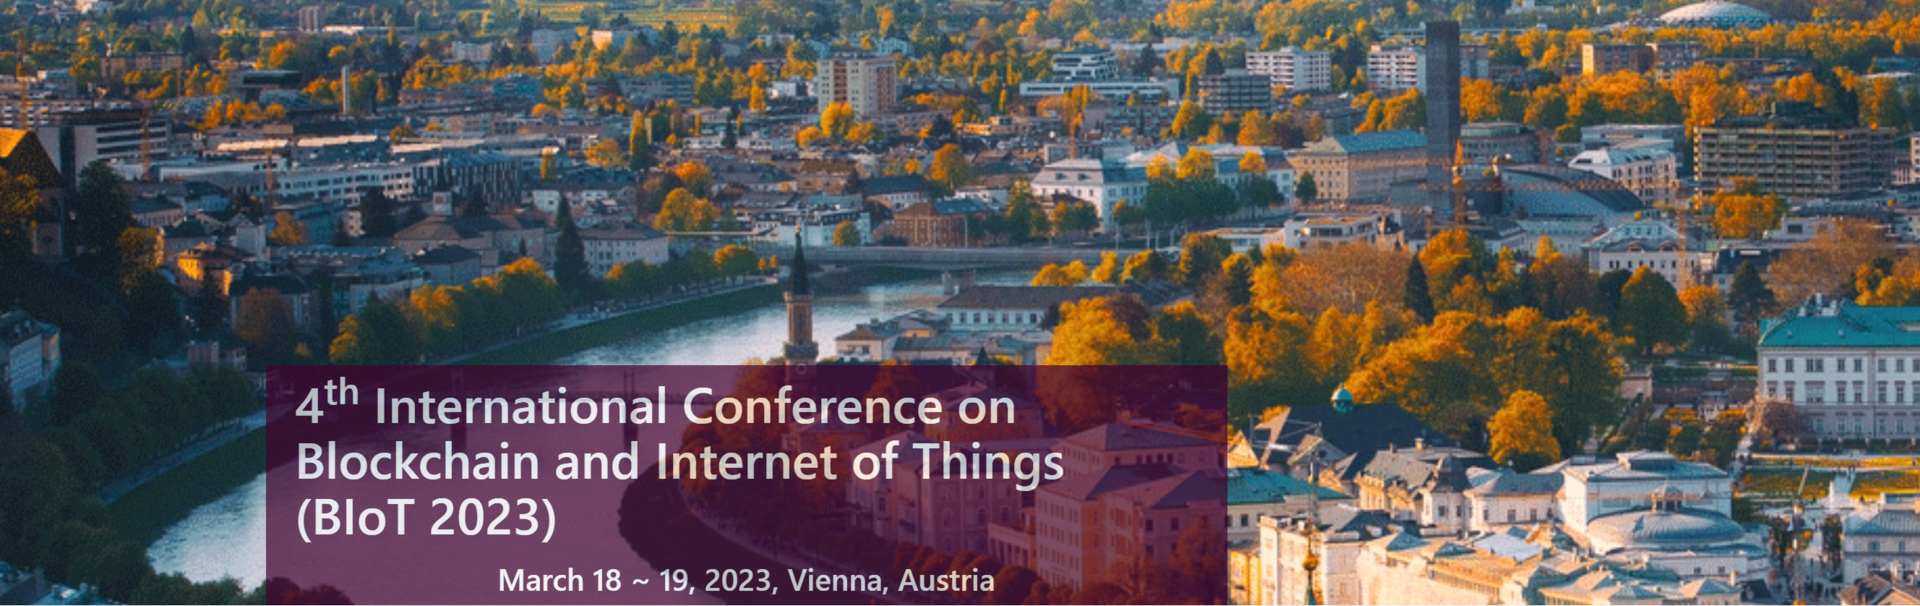 4th International Conference on Blockchain and Internet of Things (BIoT 2023)